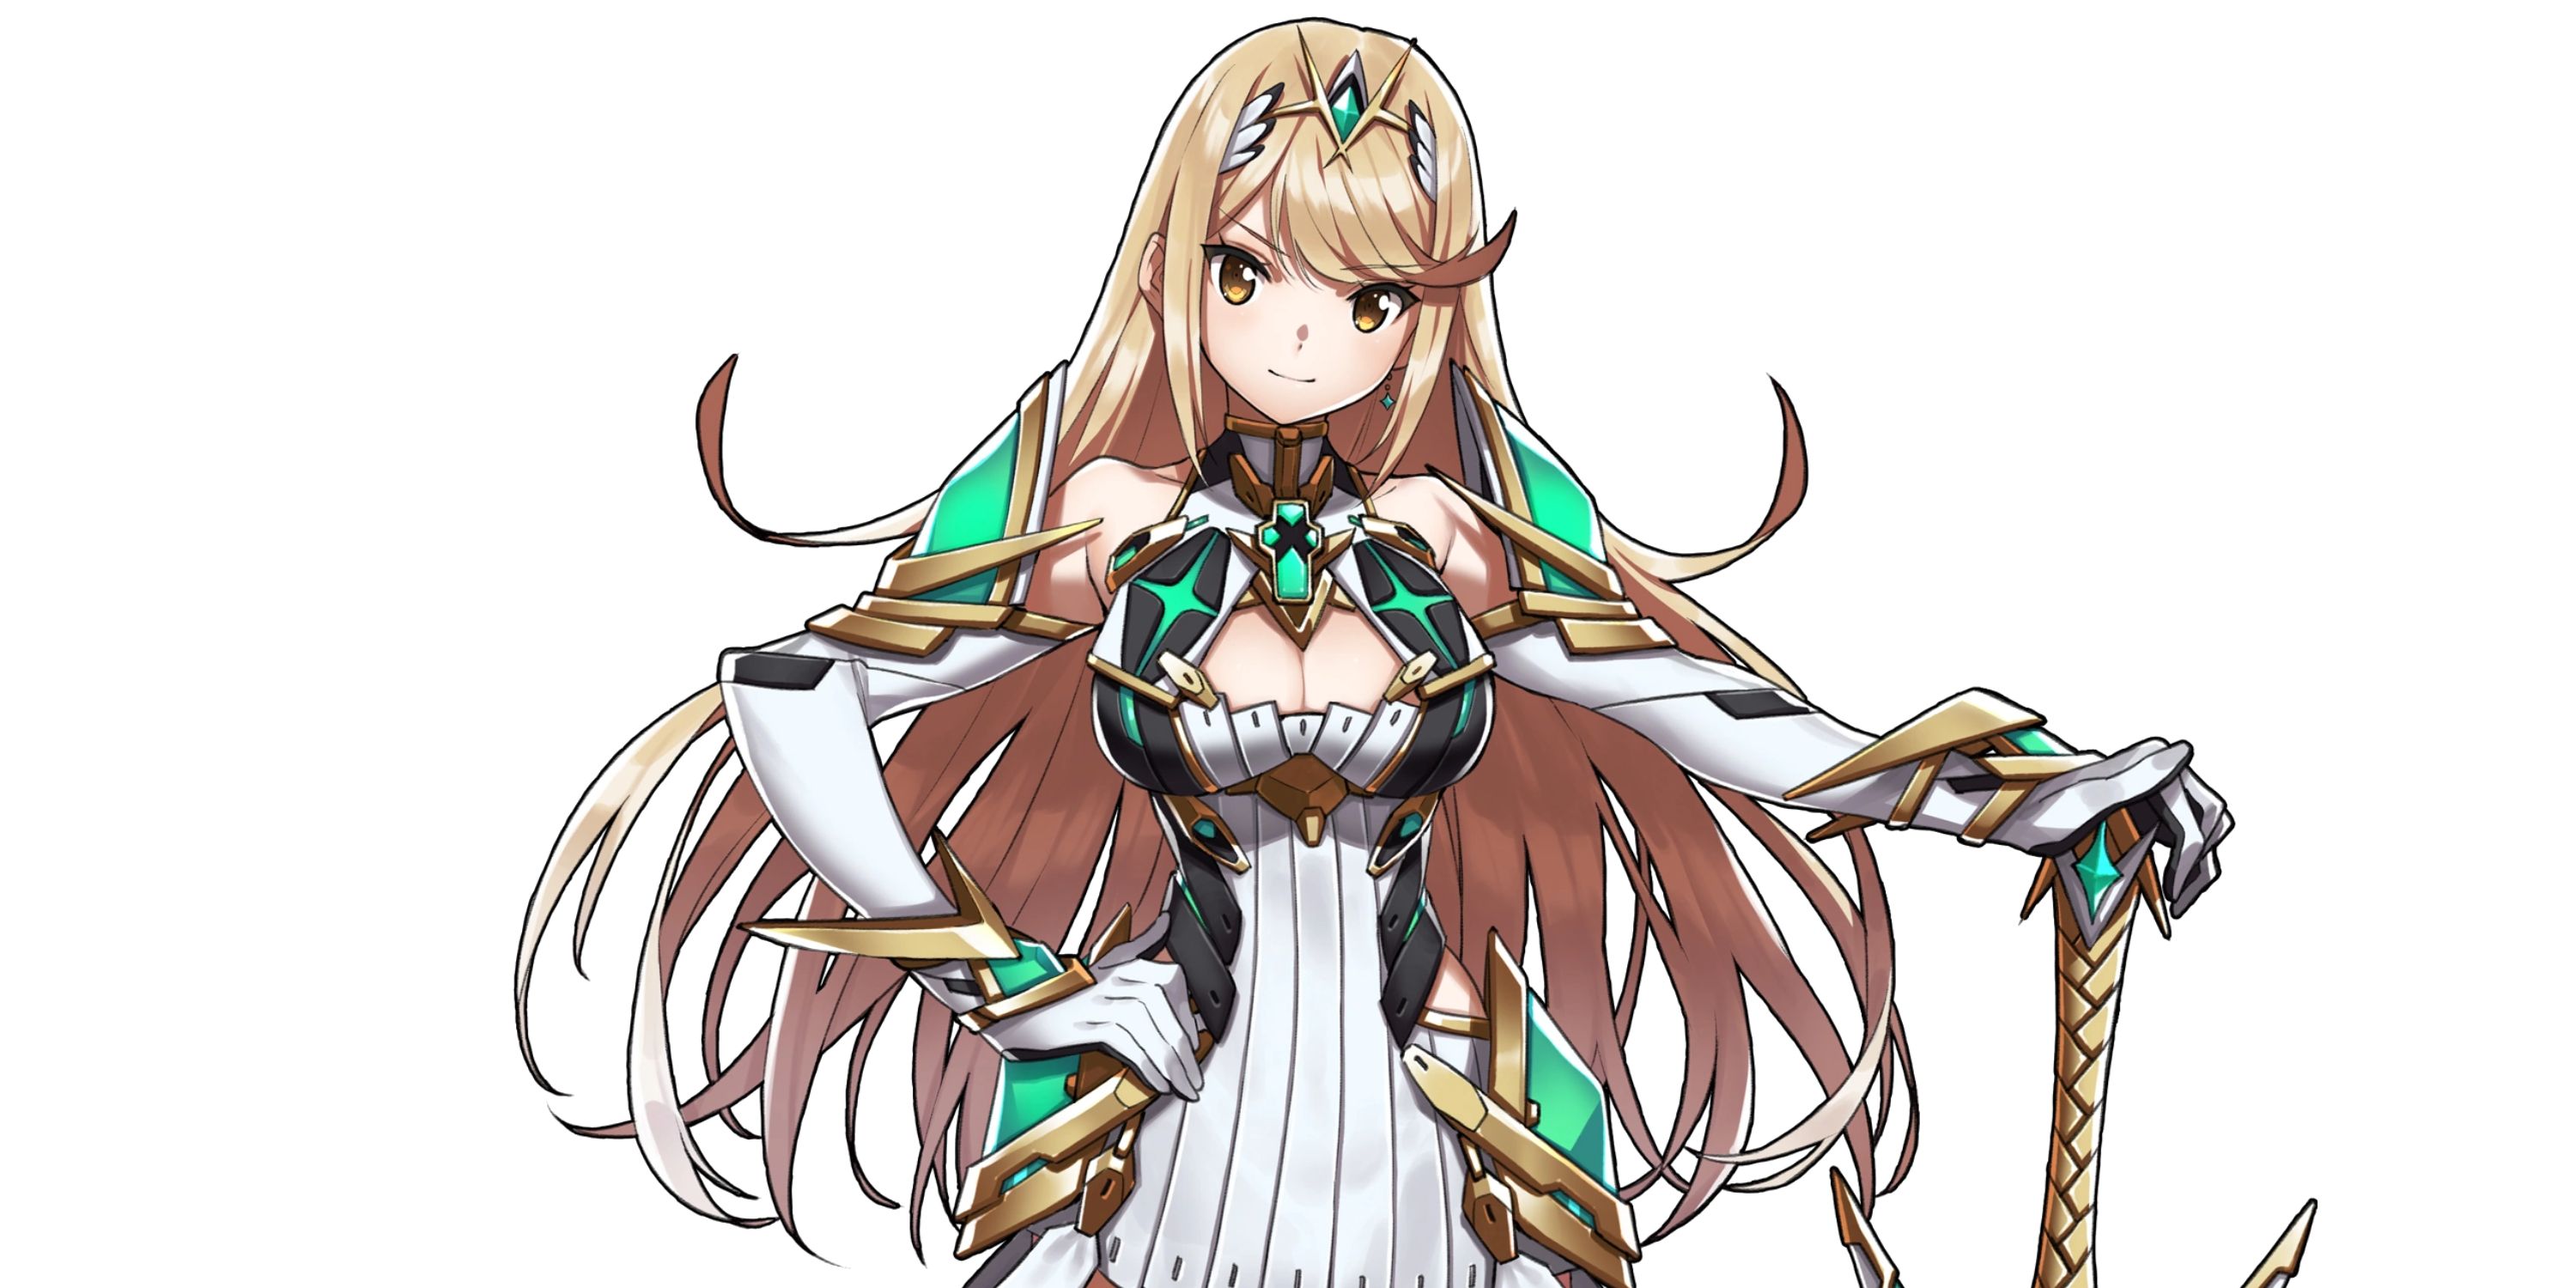 Mythra with her Aegis sword